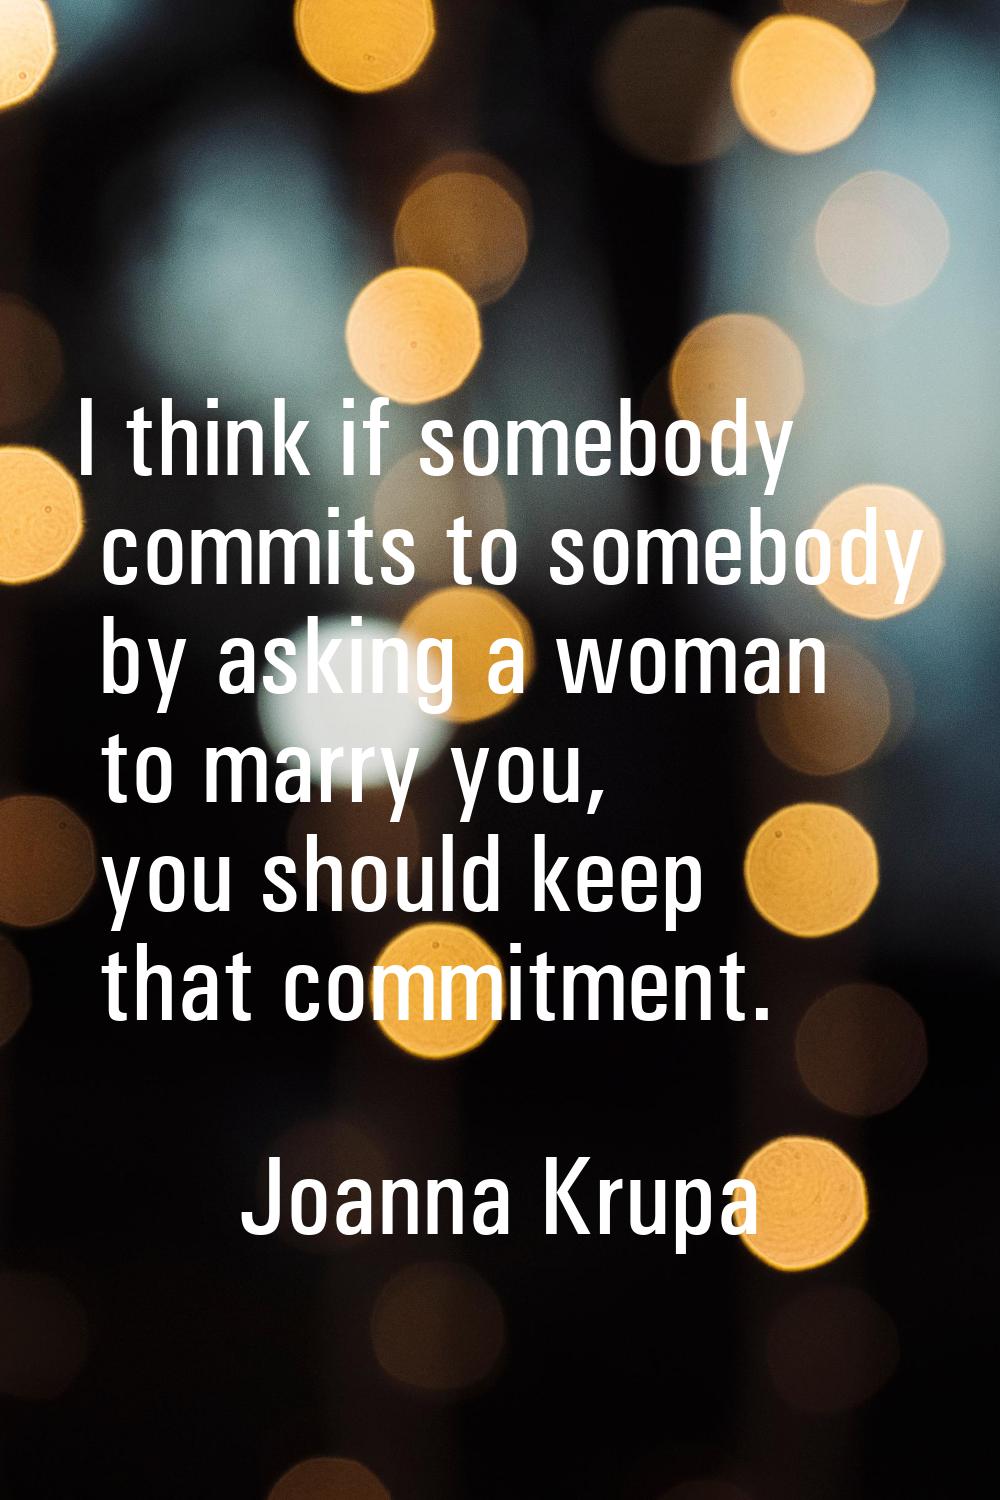 I think if somebody commits to somebody by asking a woman to marry you, you should keep that commit